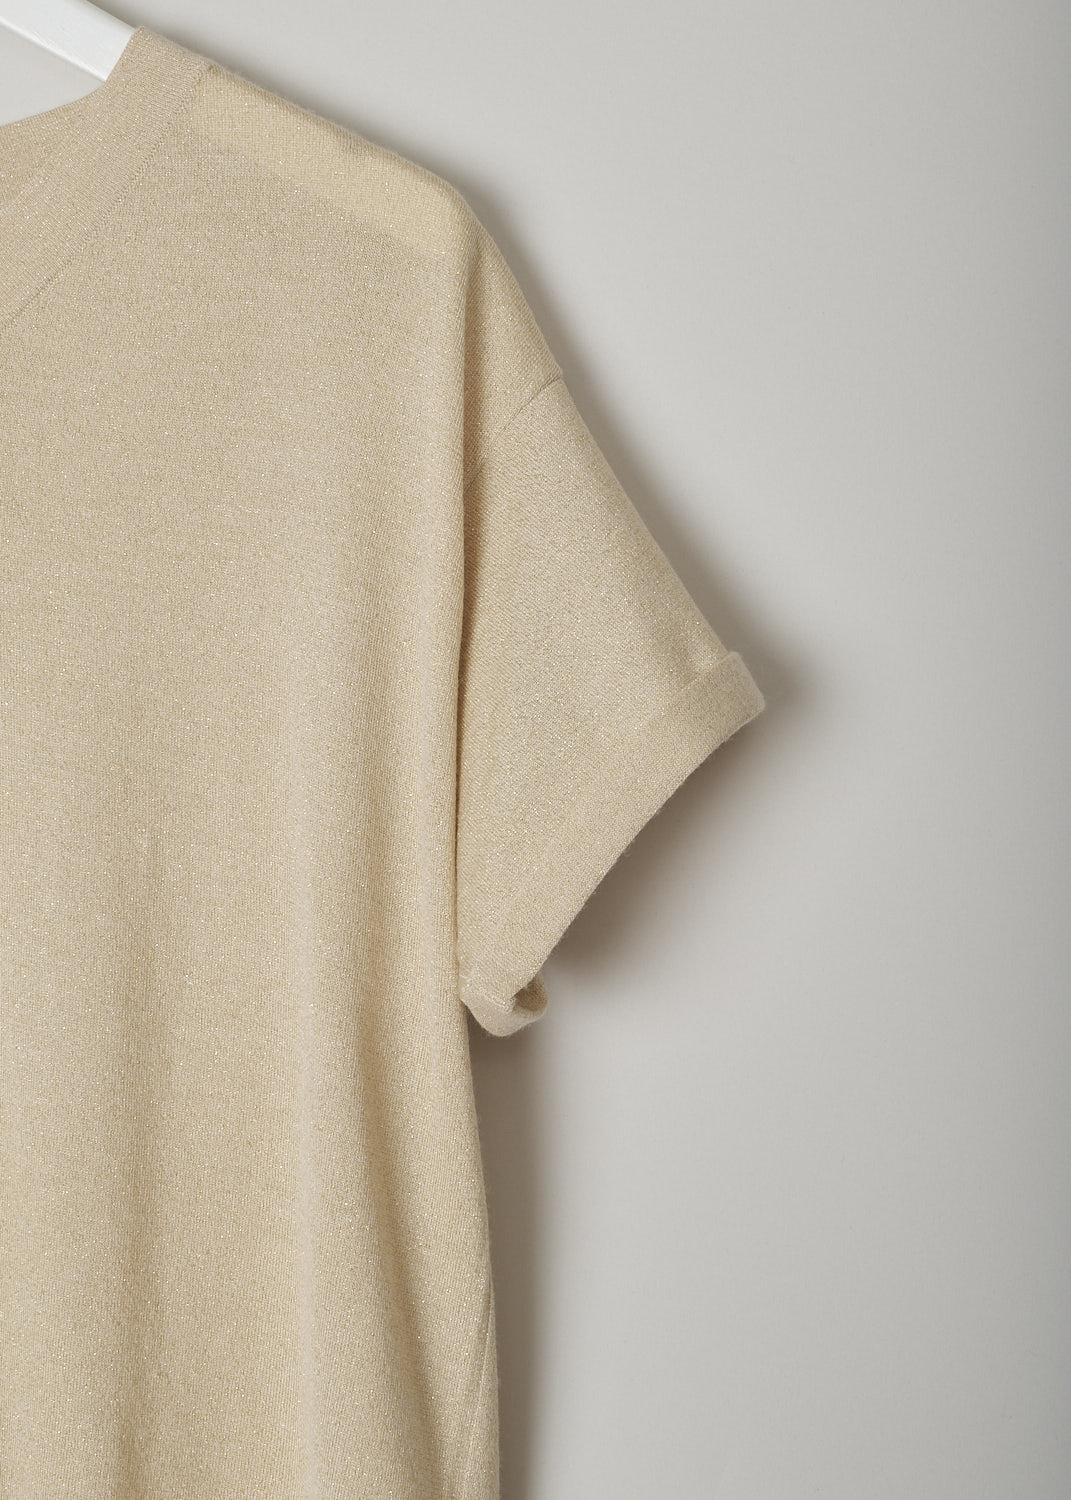 BRUNELLO CUCINELLI, PALE YELLOW TOP WITH LUREX THREADING, M41810002_C2807, Yellow, Detail, This pale yellow top has shimmering lurex threading throughout. The top has a ribbed V-neckline and rolled up short sleeves.   
